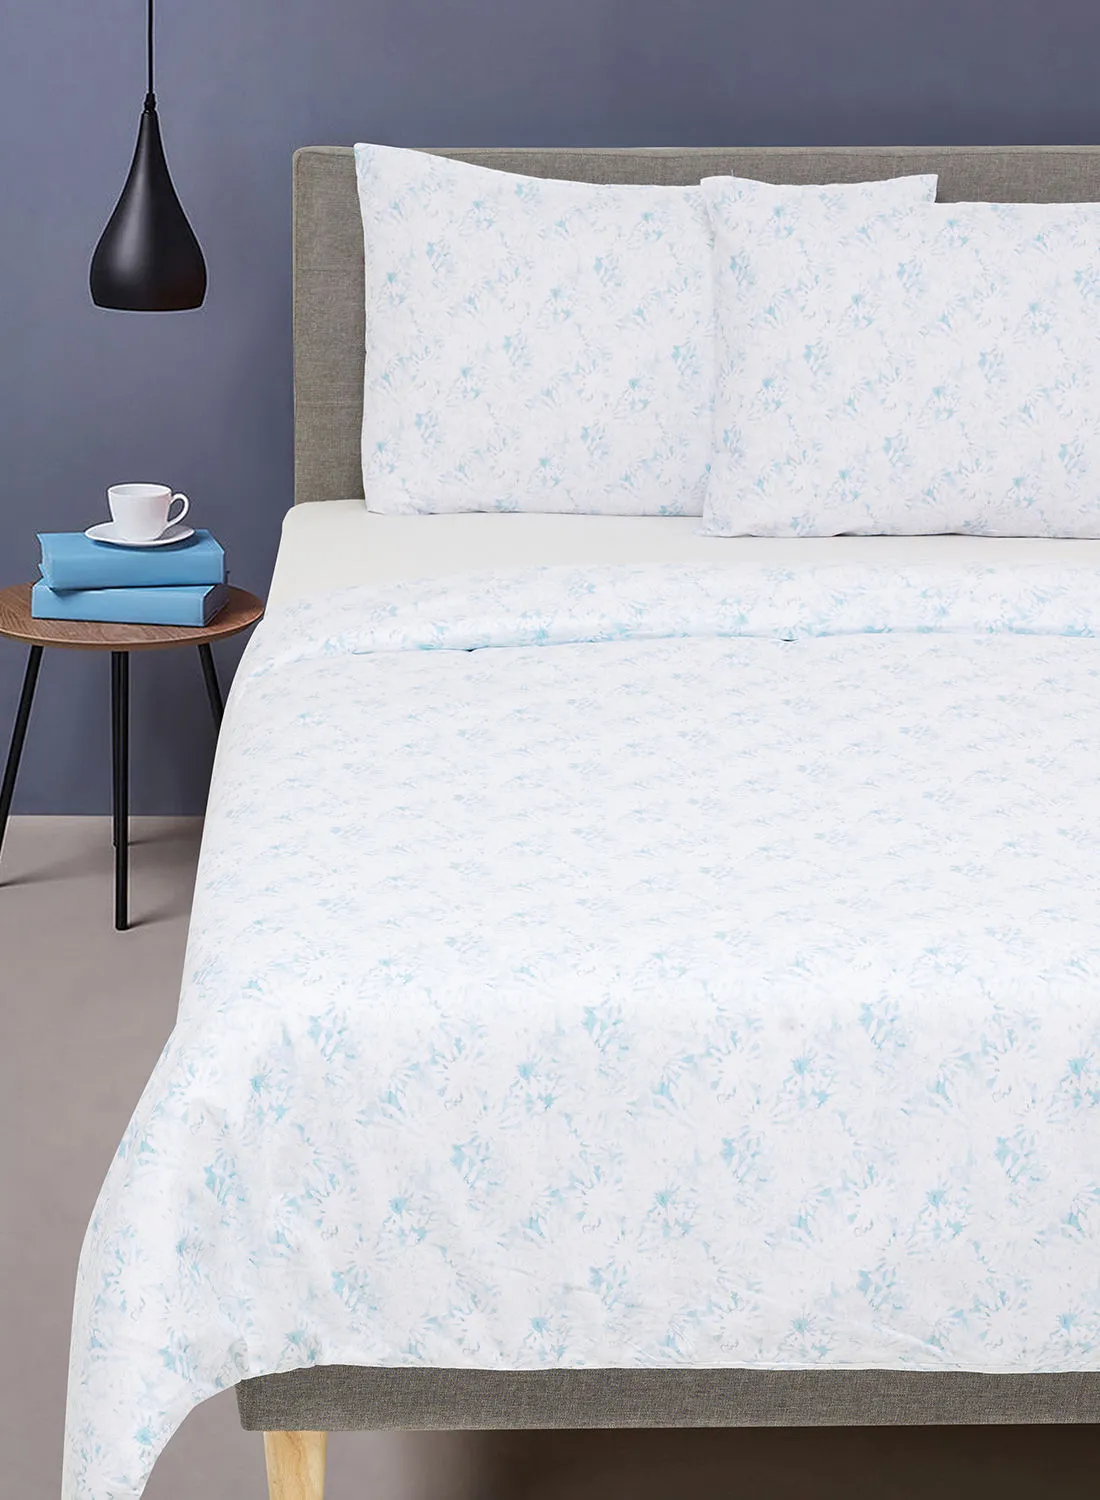 noon east Duvet Cover With Pillow Cover 50X75 Cm, Comforter 200X200 Cm, - For Queen Size Mattress - Springfield Blue 100% Cotton Percale - 180 Thread Count